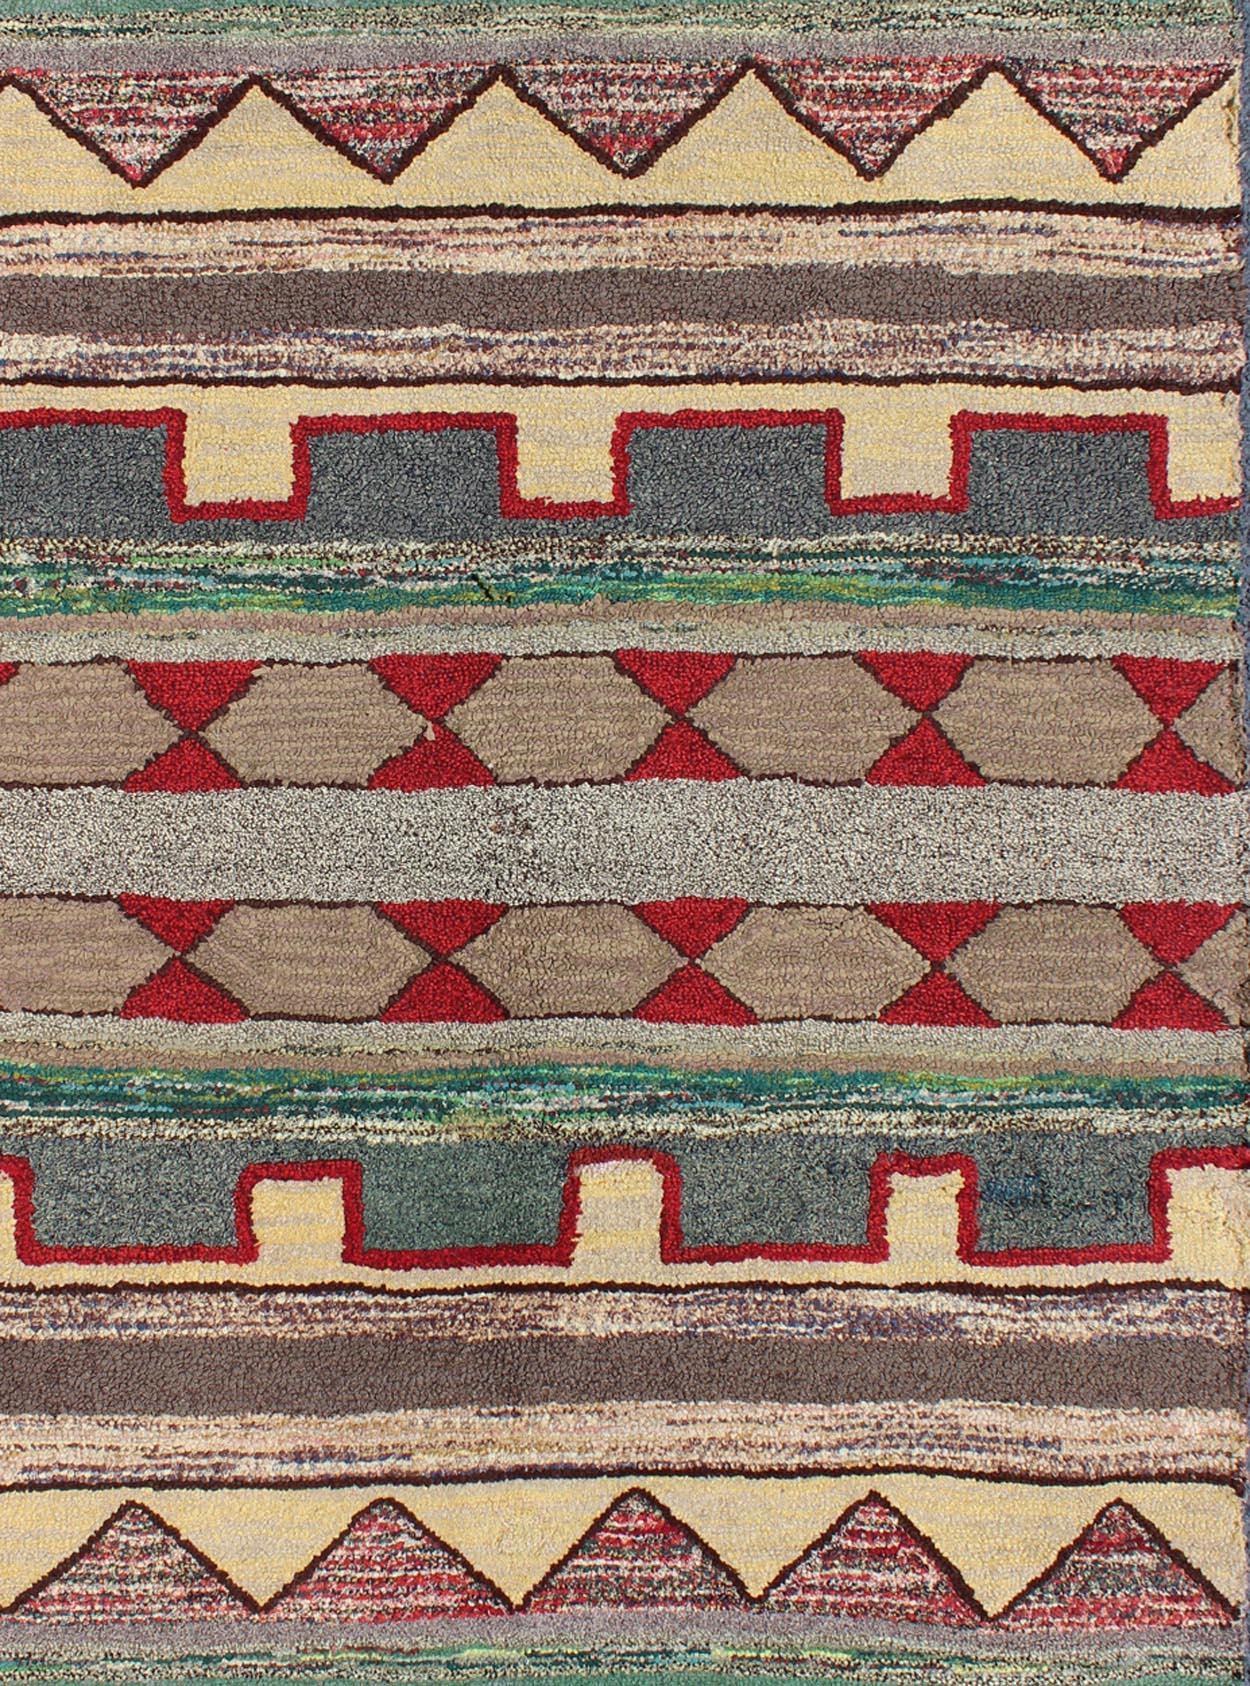 Vintage American hooked rug with geometric tribal designs, Keivan Woven Arts / rug J10-1014, country of origin / type: United States / Hooked, circa 1950

Ingenious in style, color and composition, the features in this spectacular, vintage